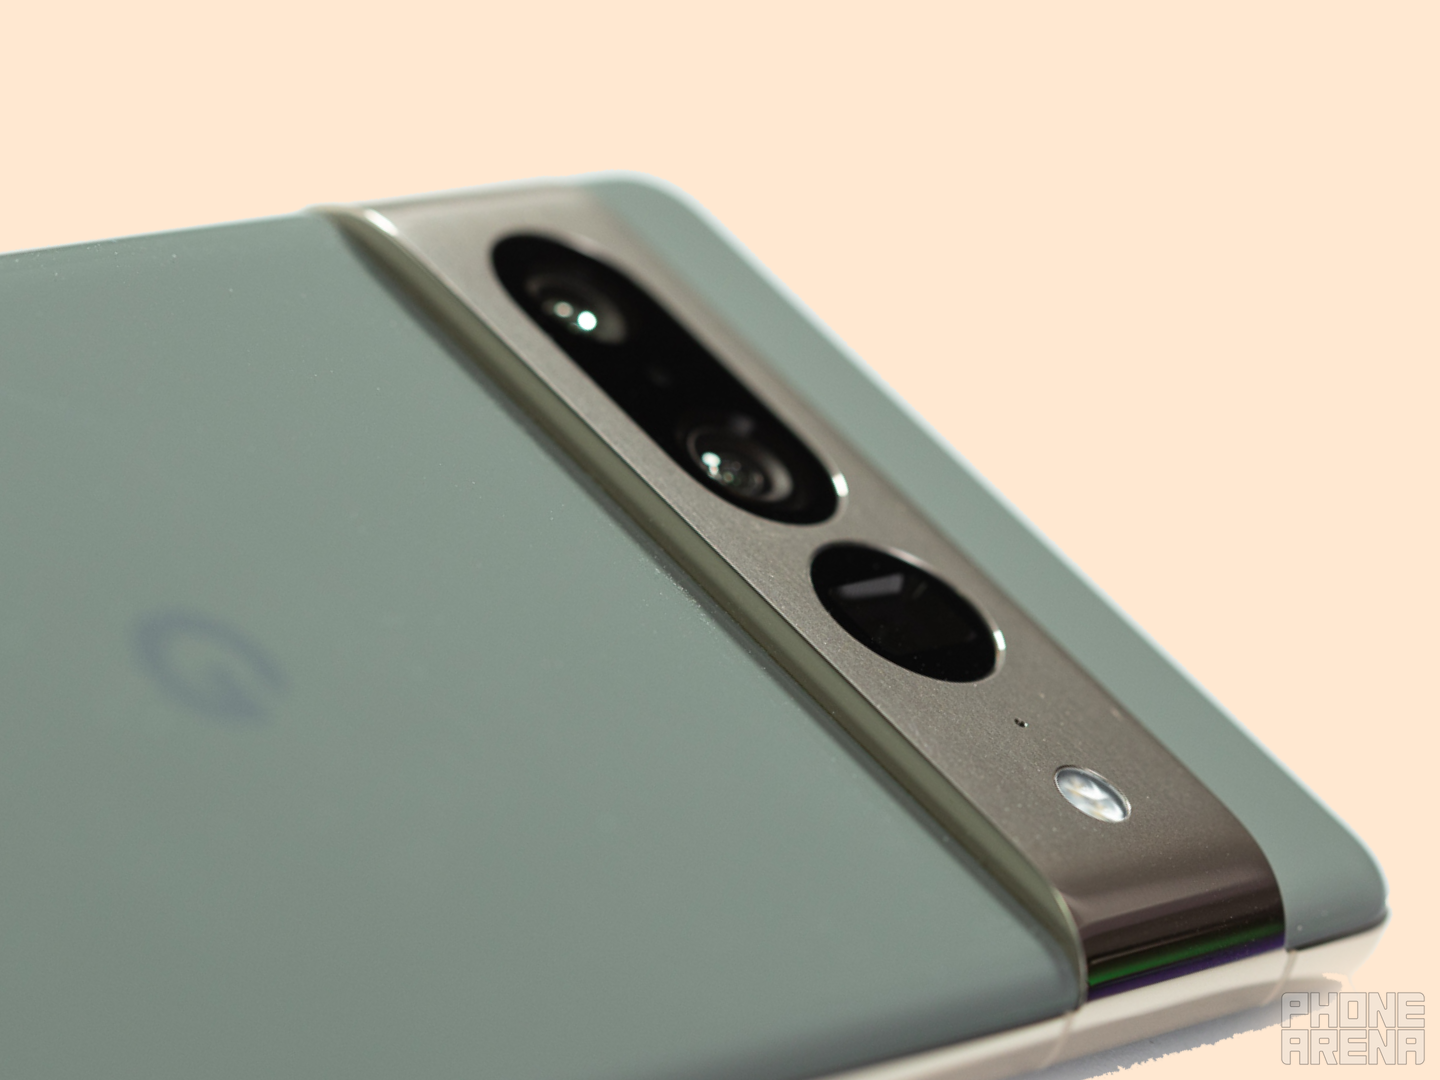 As of now, only the last two series of Pixel flagships are planned to get Spatial Audio. - Google shares details about upcoming Spatial Audio for Pixel phones and buds